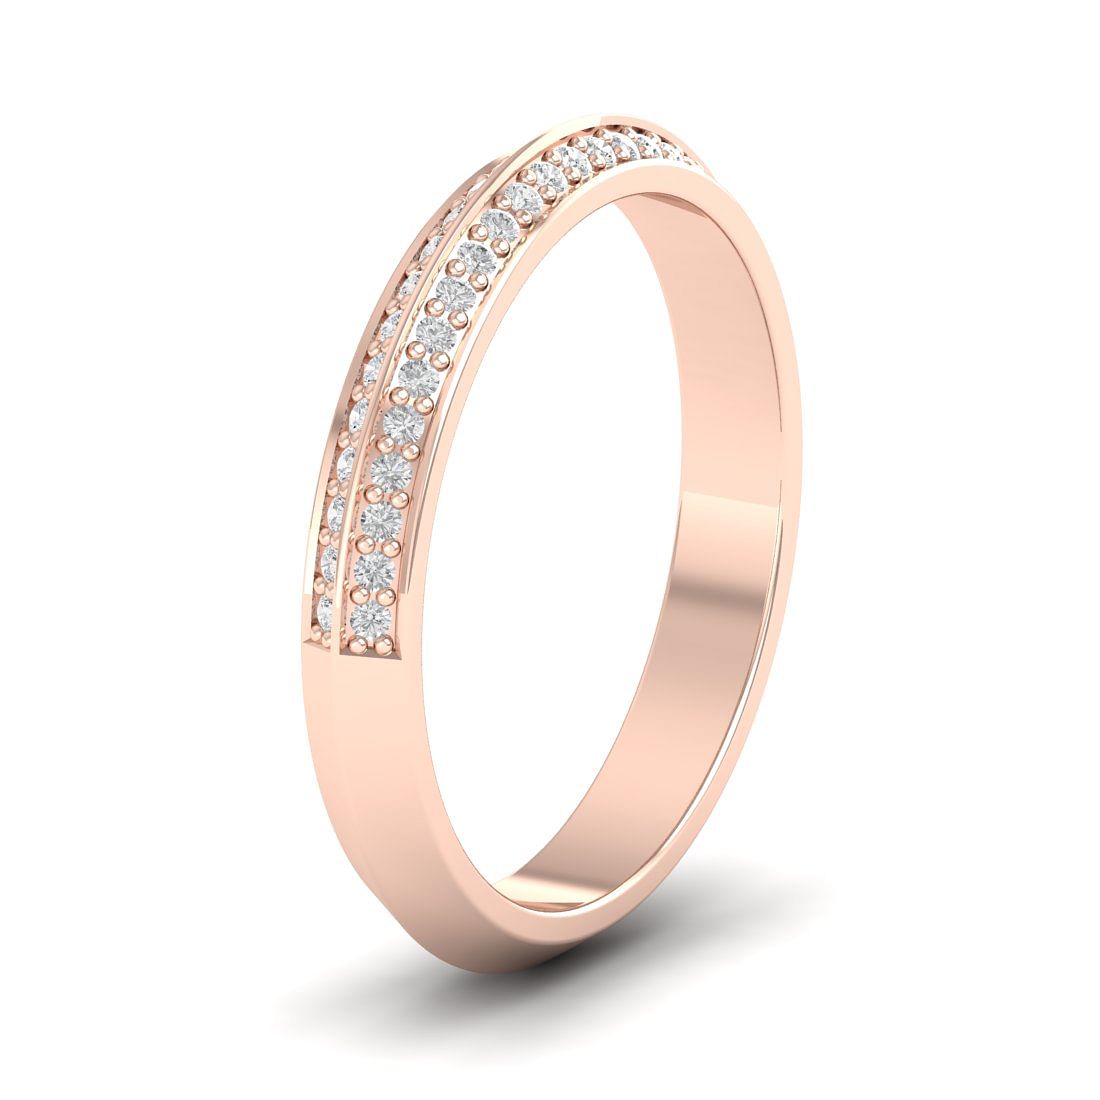 Chanchal band style rose gold diamond ring for women